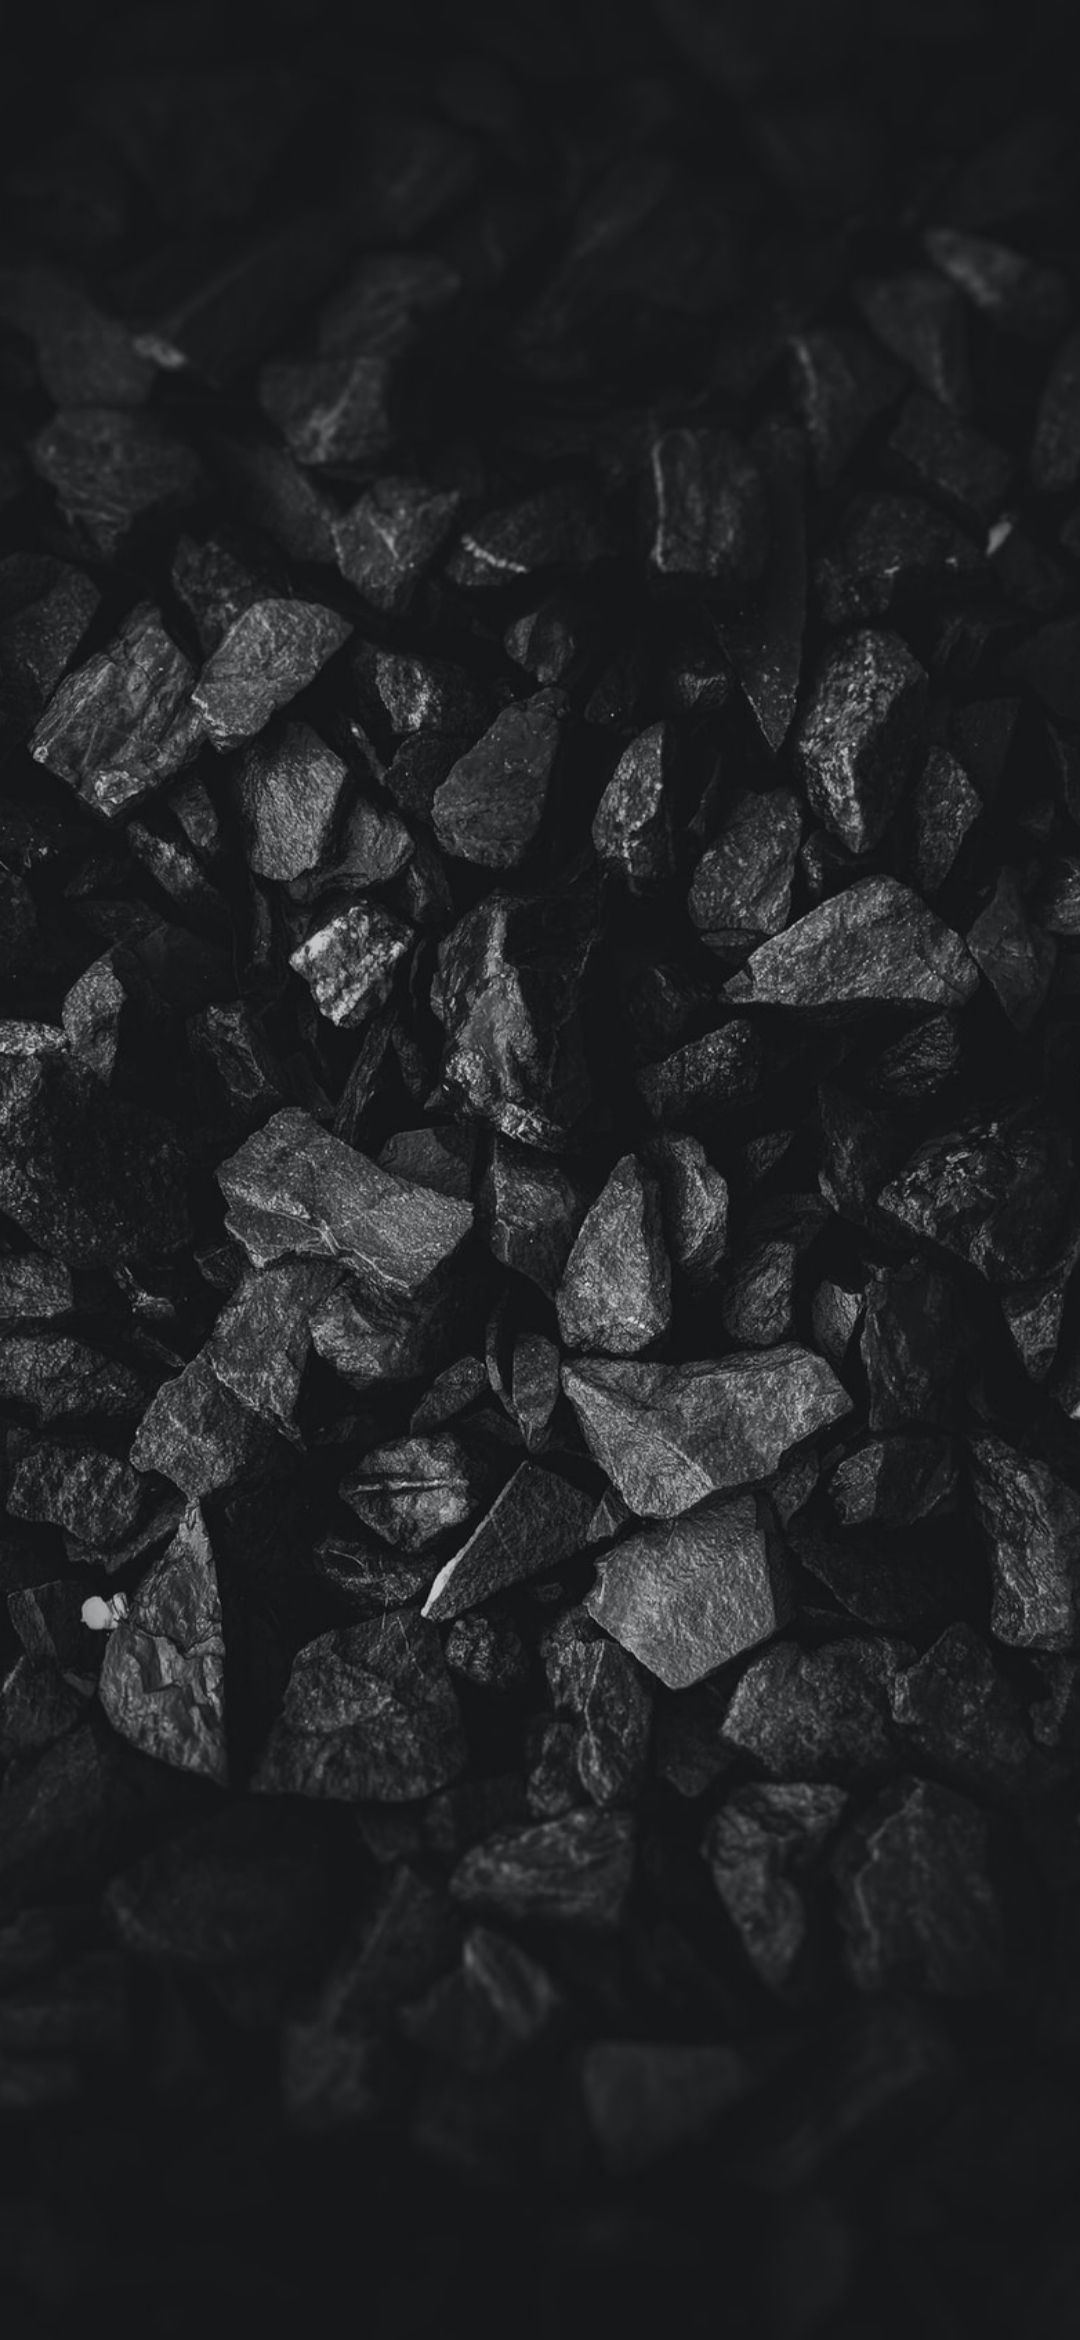 A black and white image of a pile of coal - Black